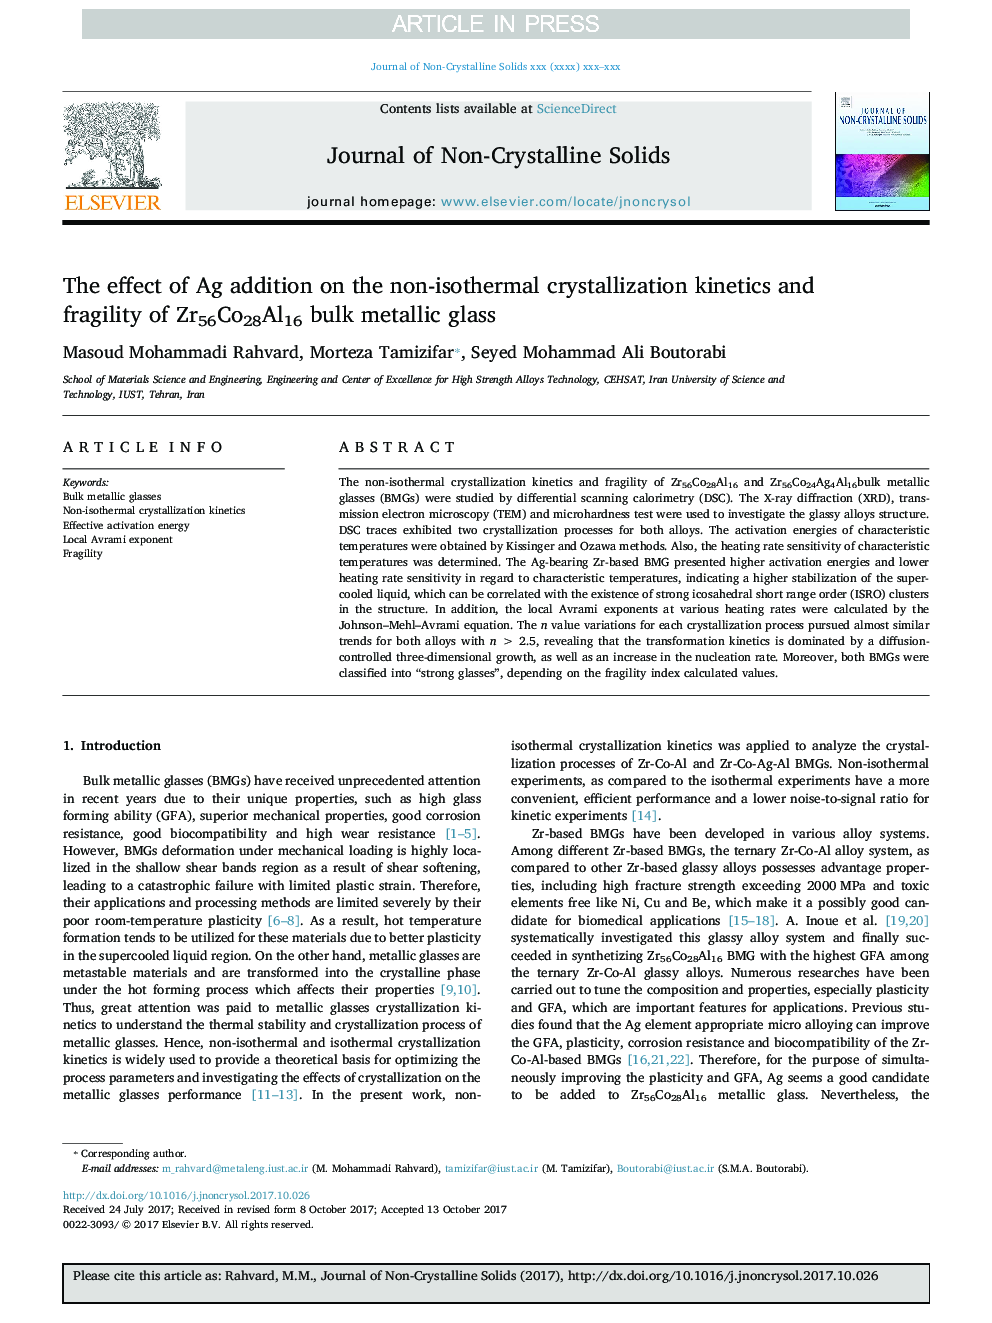 The effect of Ag addition on the non-isothermal crystallization kinetics and fragility of Zr56Co28Al16 bulk metallic glass